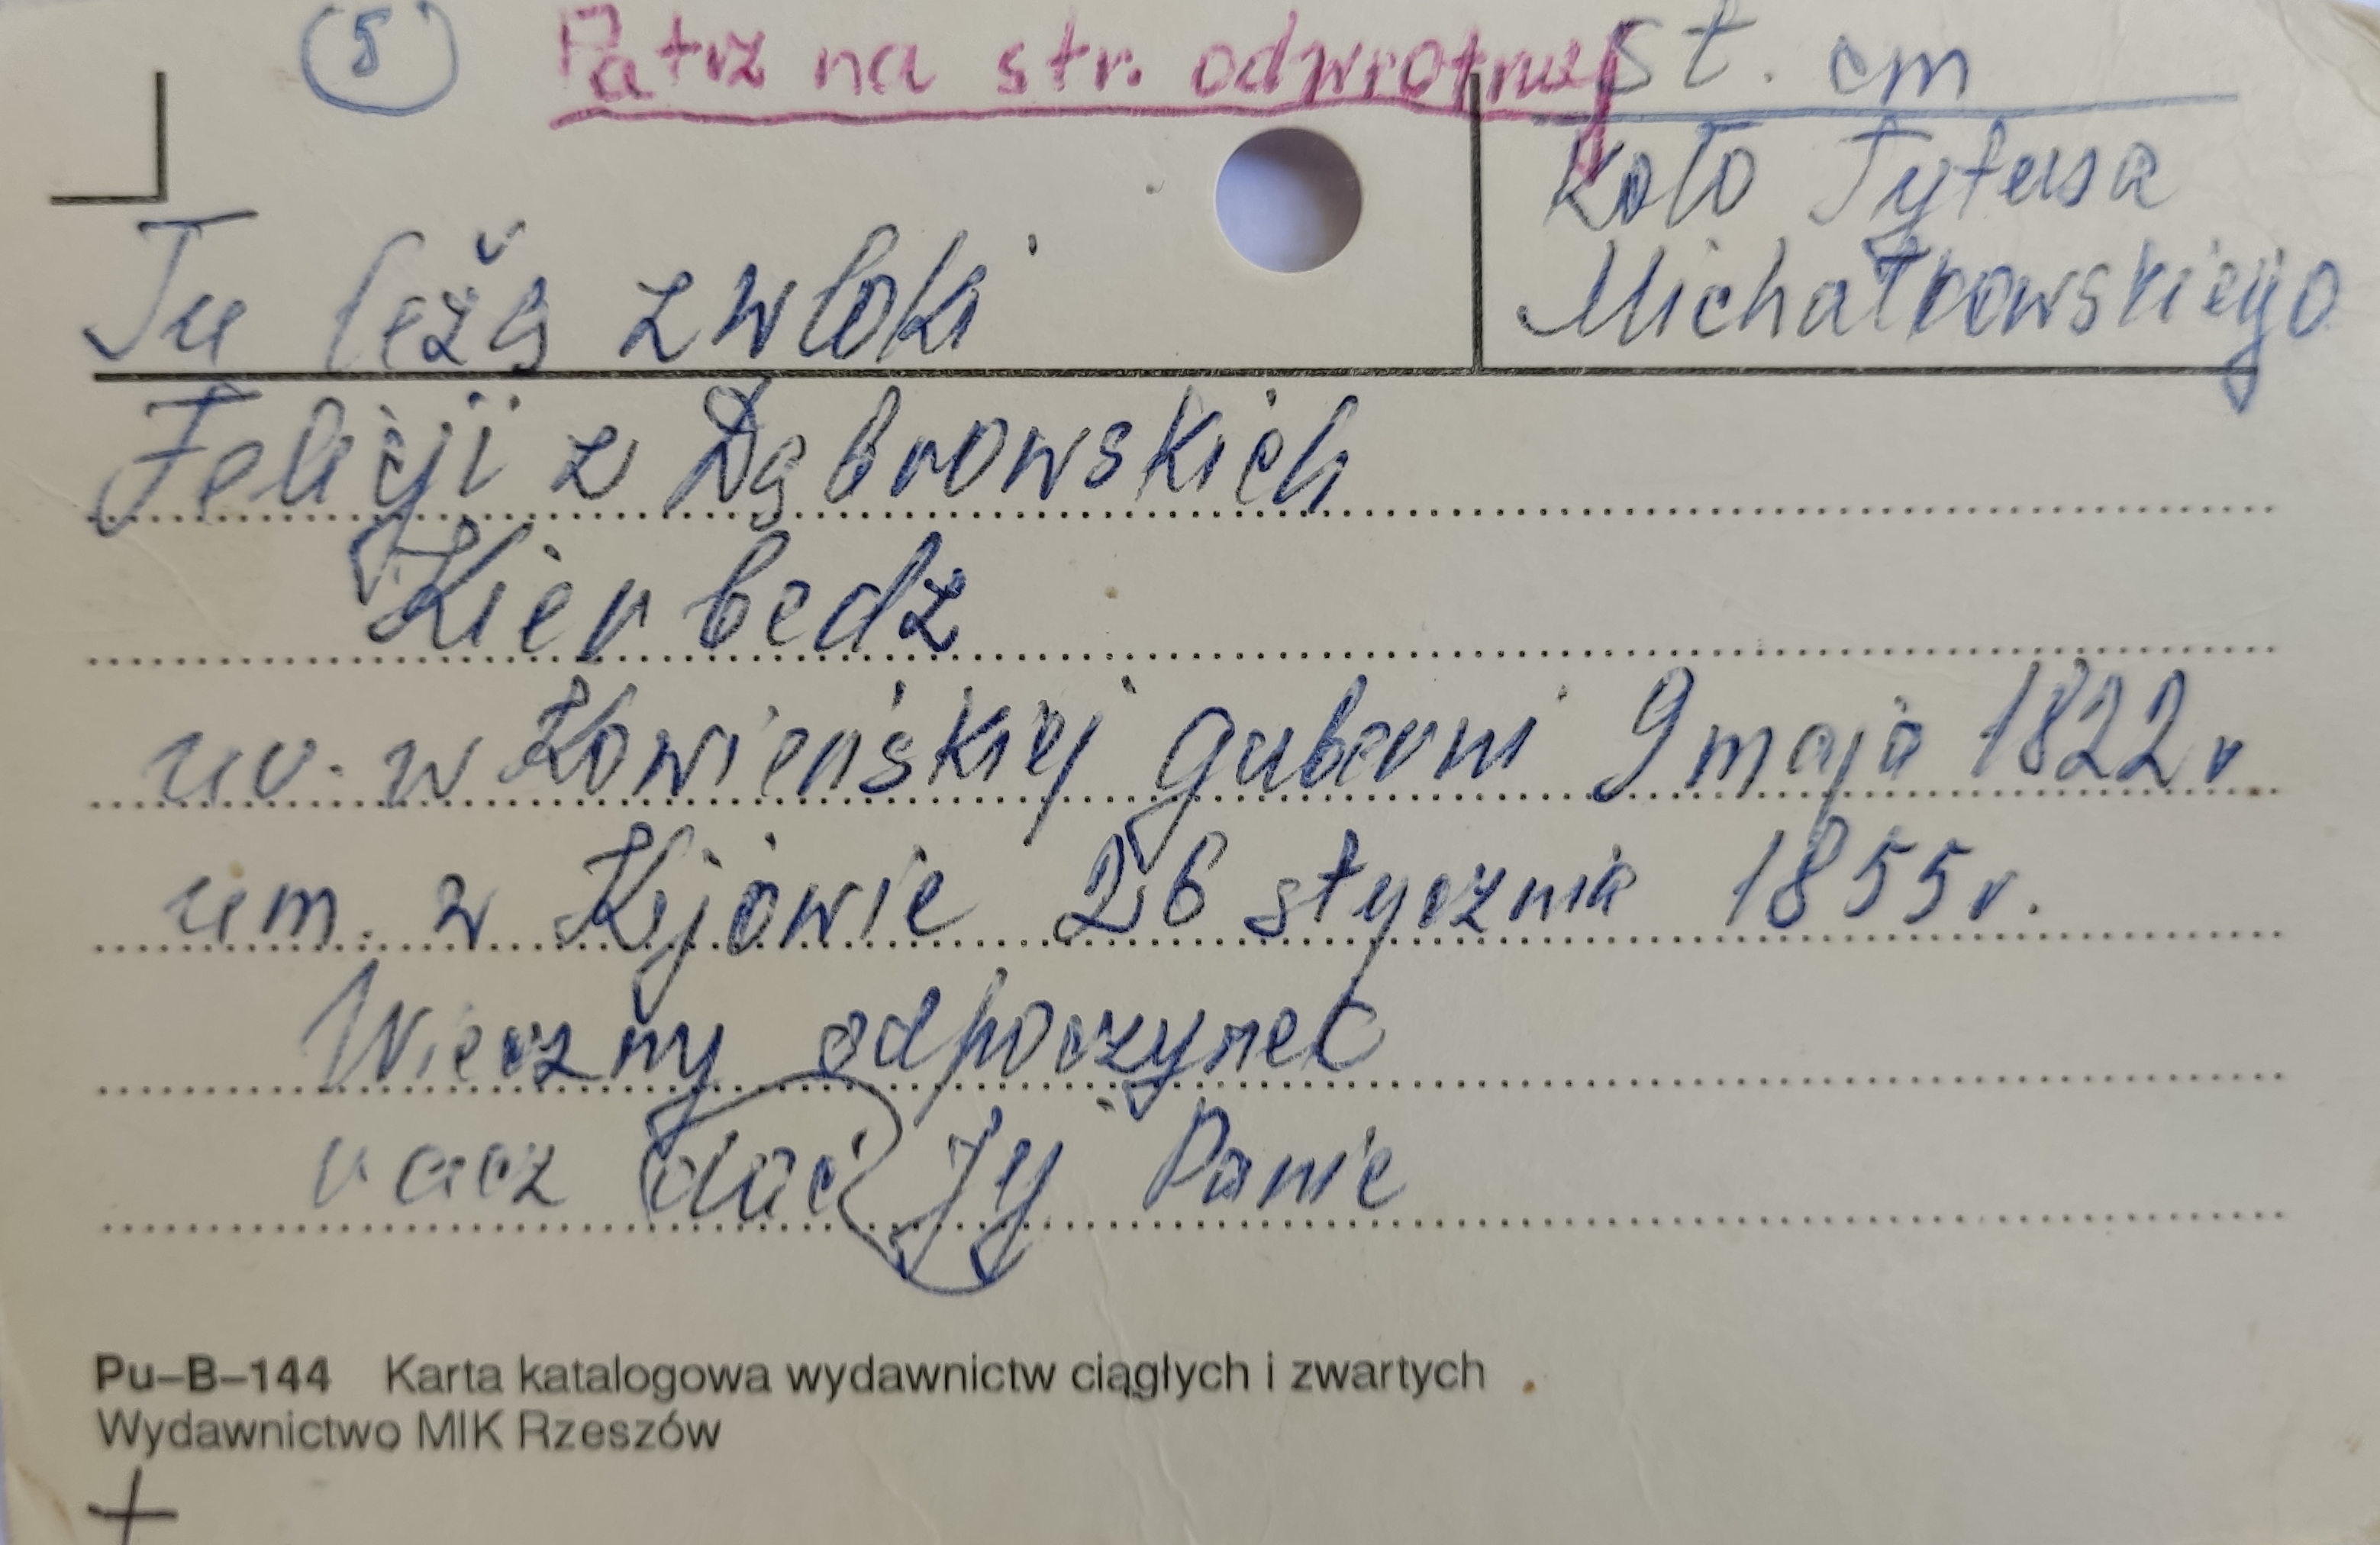 Archive card of the Kiev Association of Consent from the 1990s.